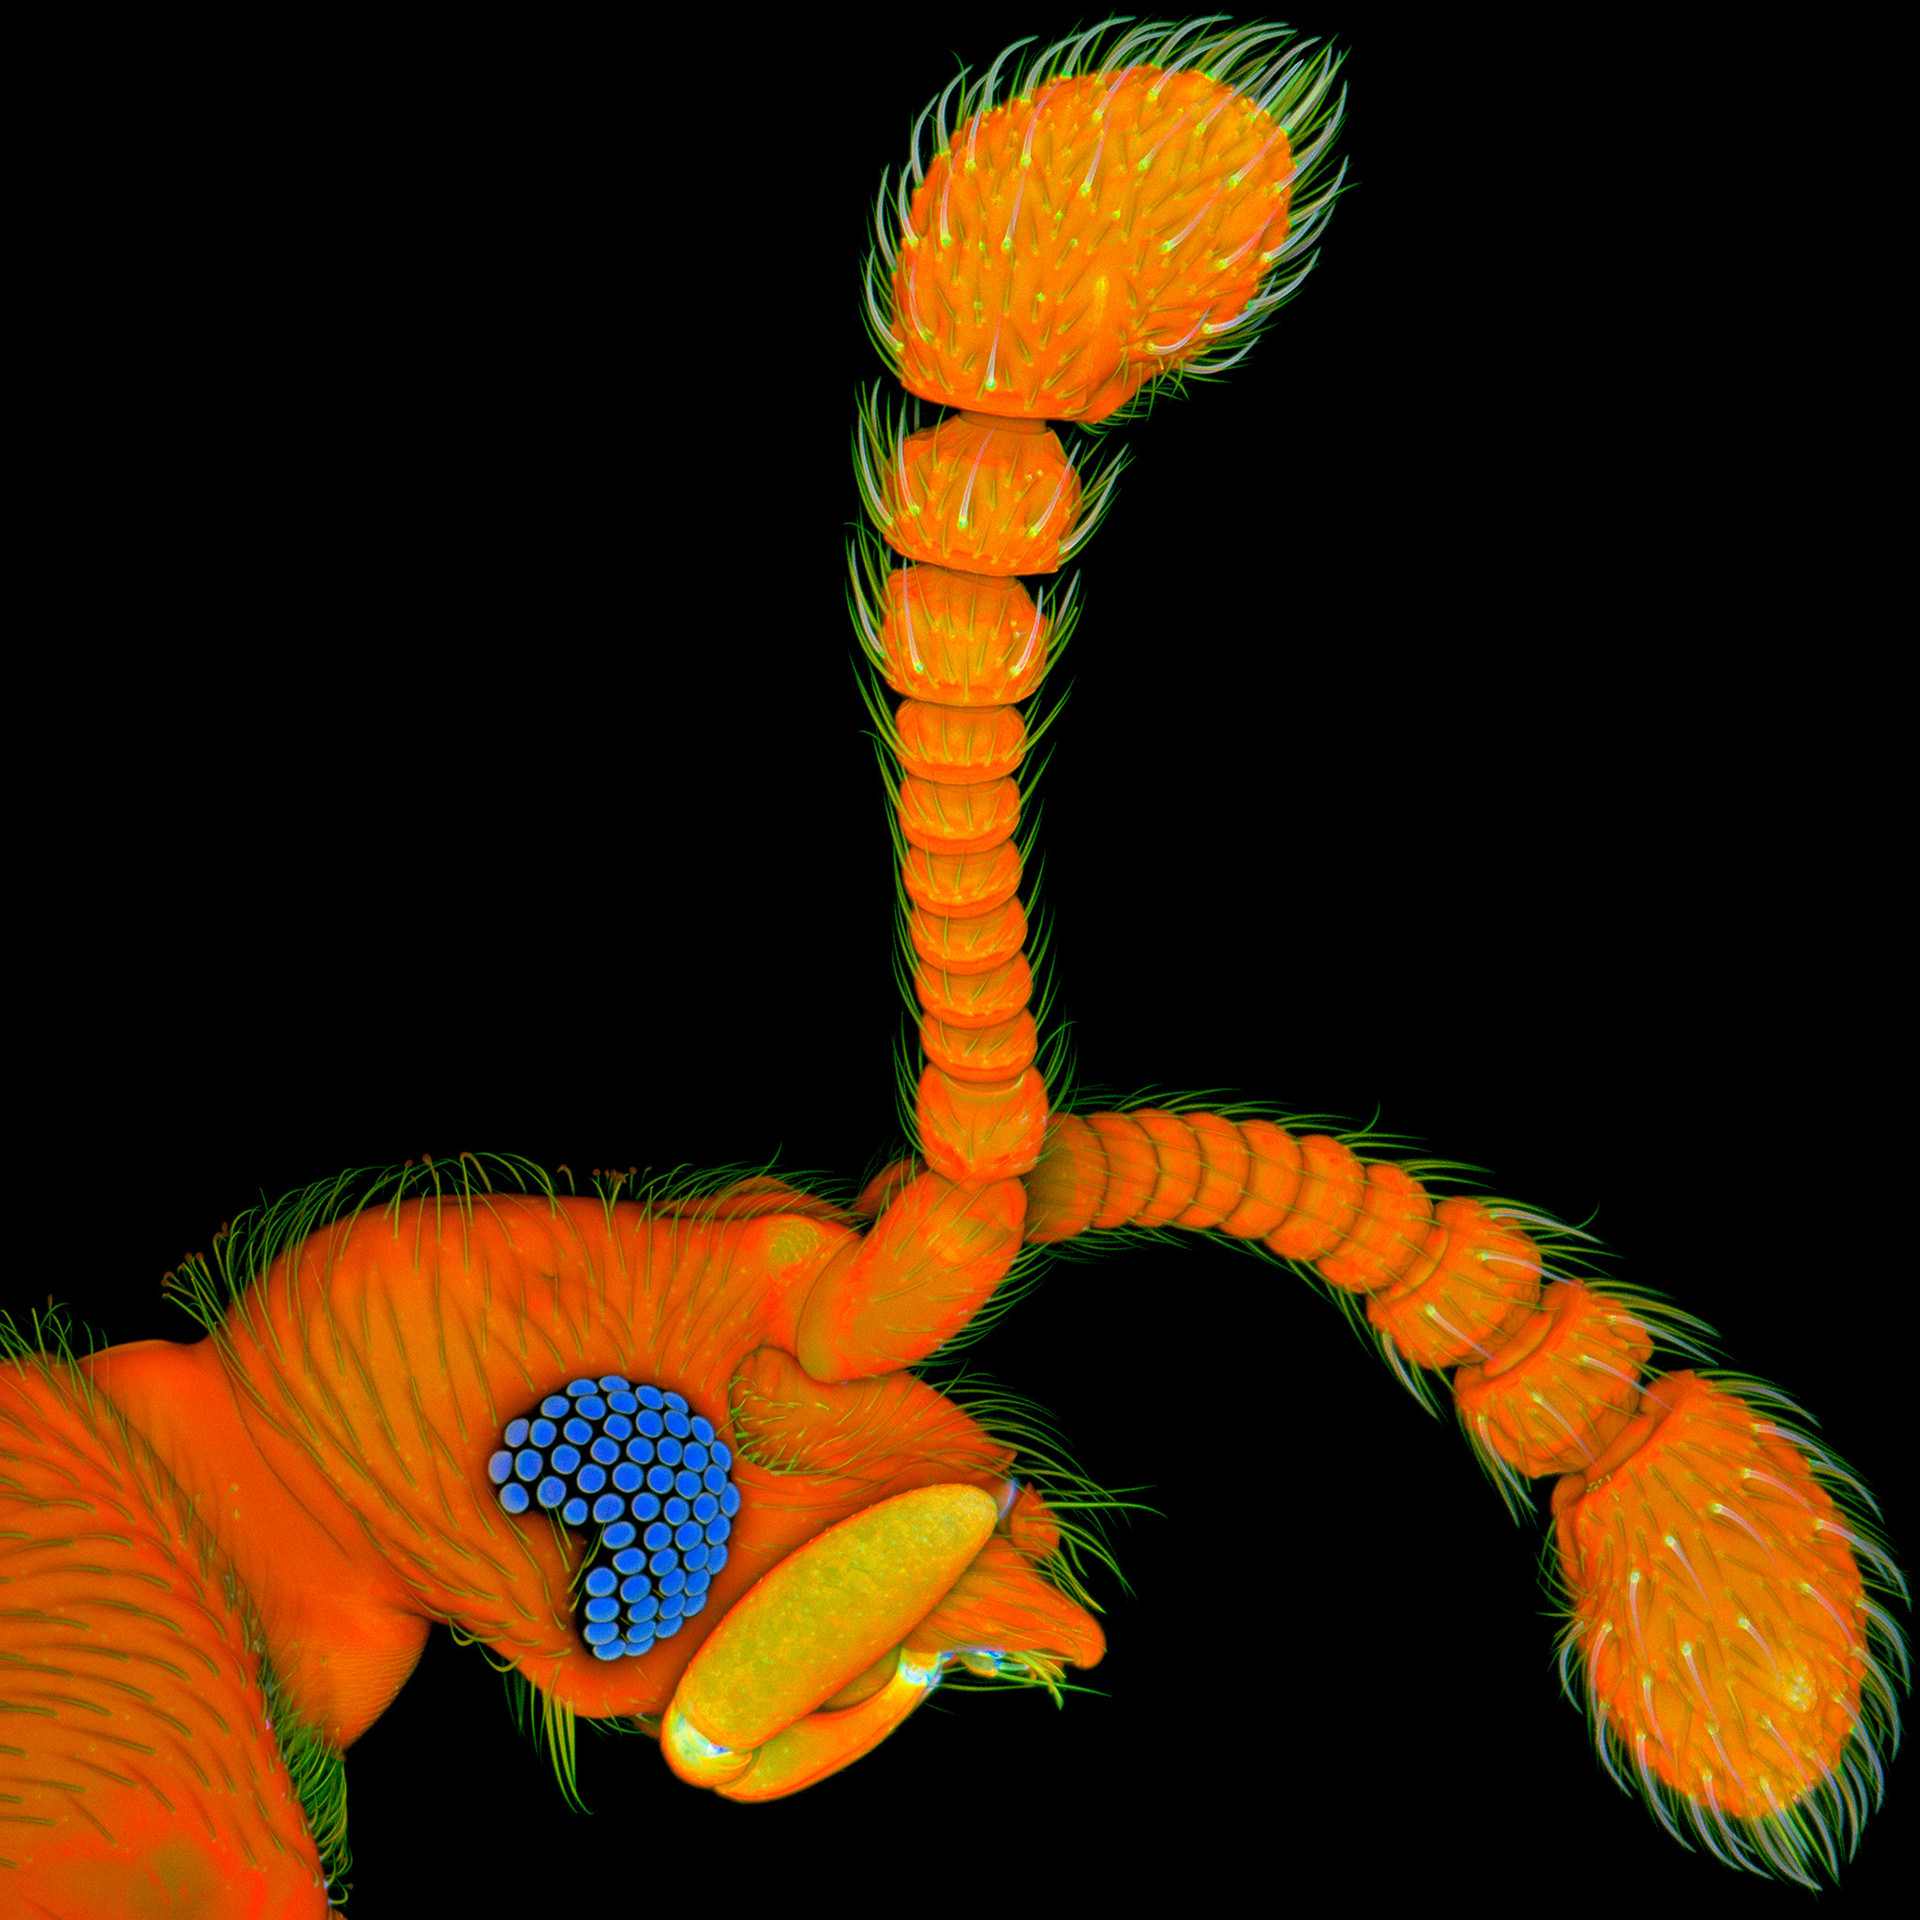 Beetle of the genus Circocerus, collected from leaf litter in the Peruvian lowland Amazon rainforest. Sample provided by Dr. Joseph Parker. Imaged with a ZEISS LSM 800 confocal microscope.